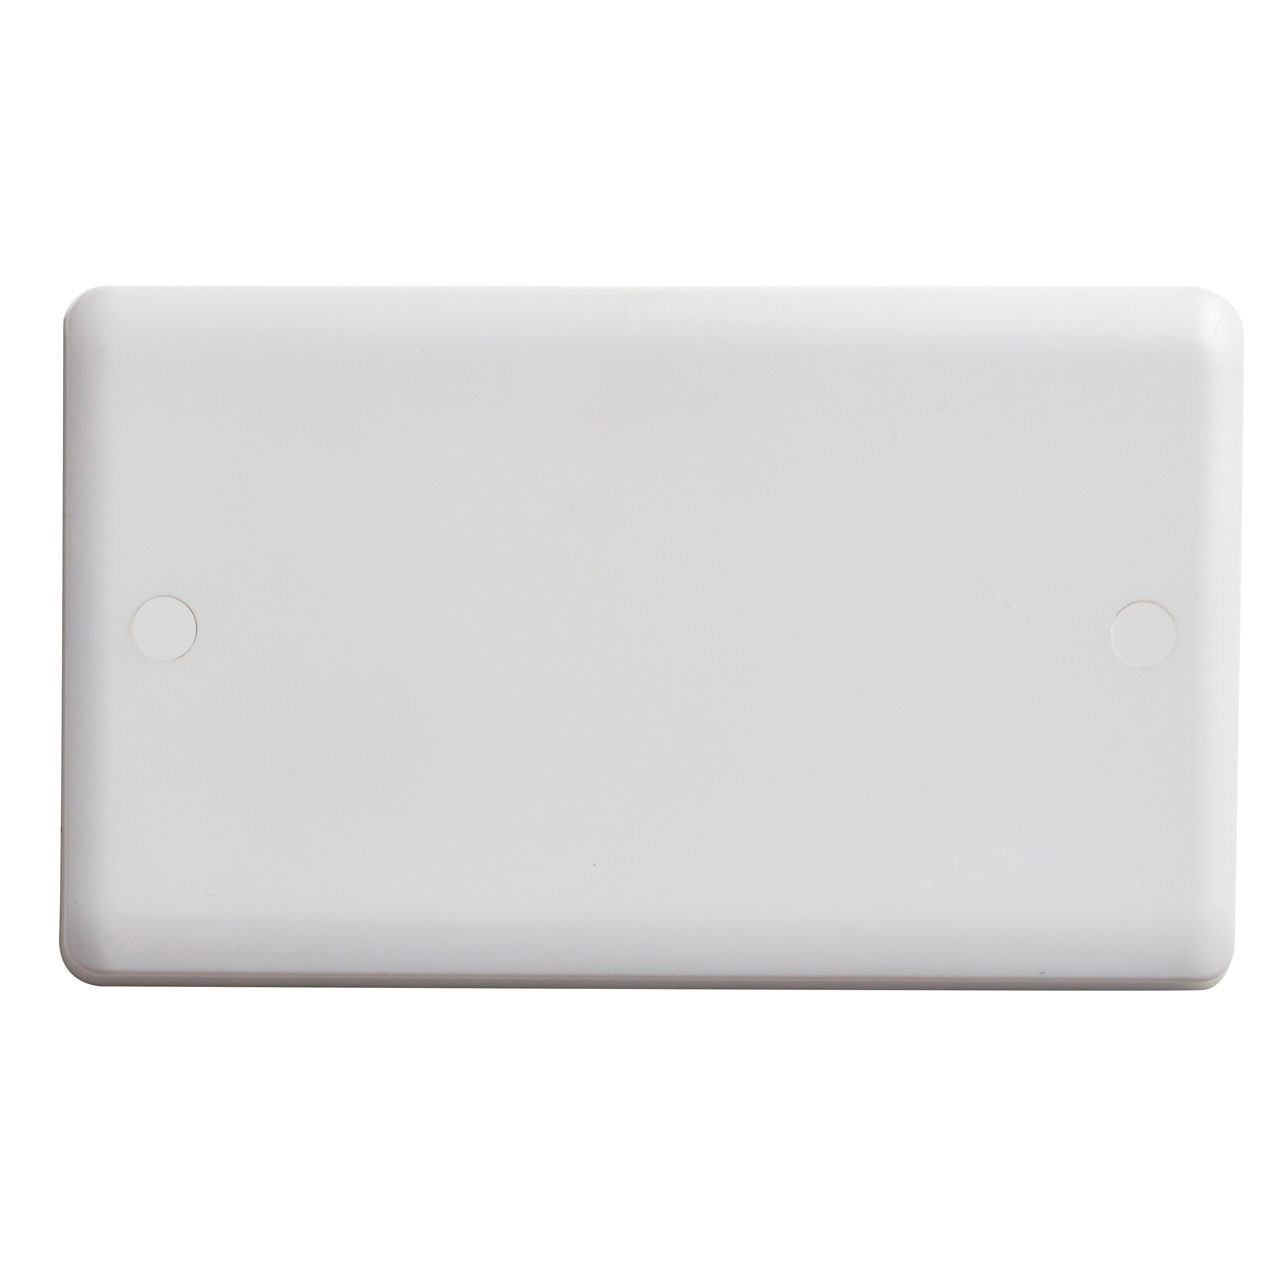 Photograph of Vimark Curve Vc1201 2 Gang Blank Plate White